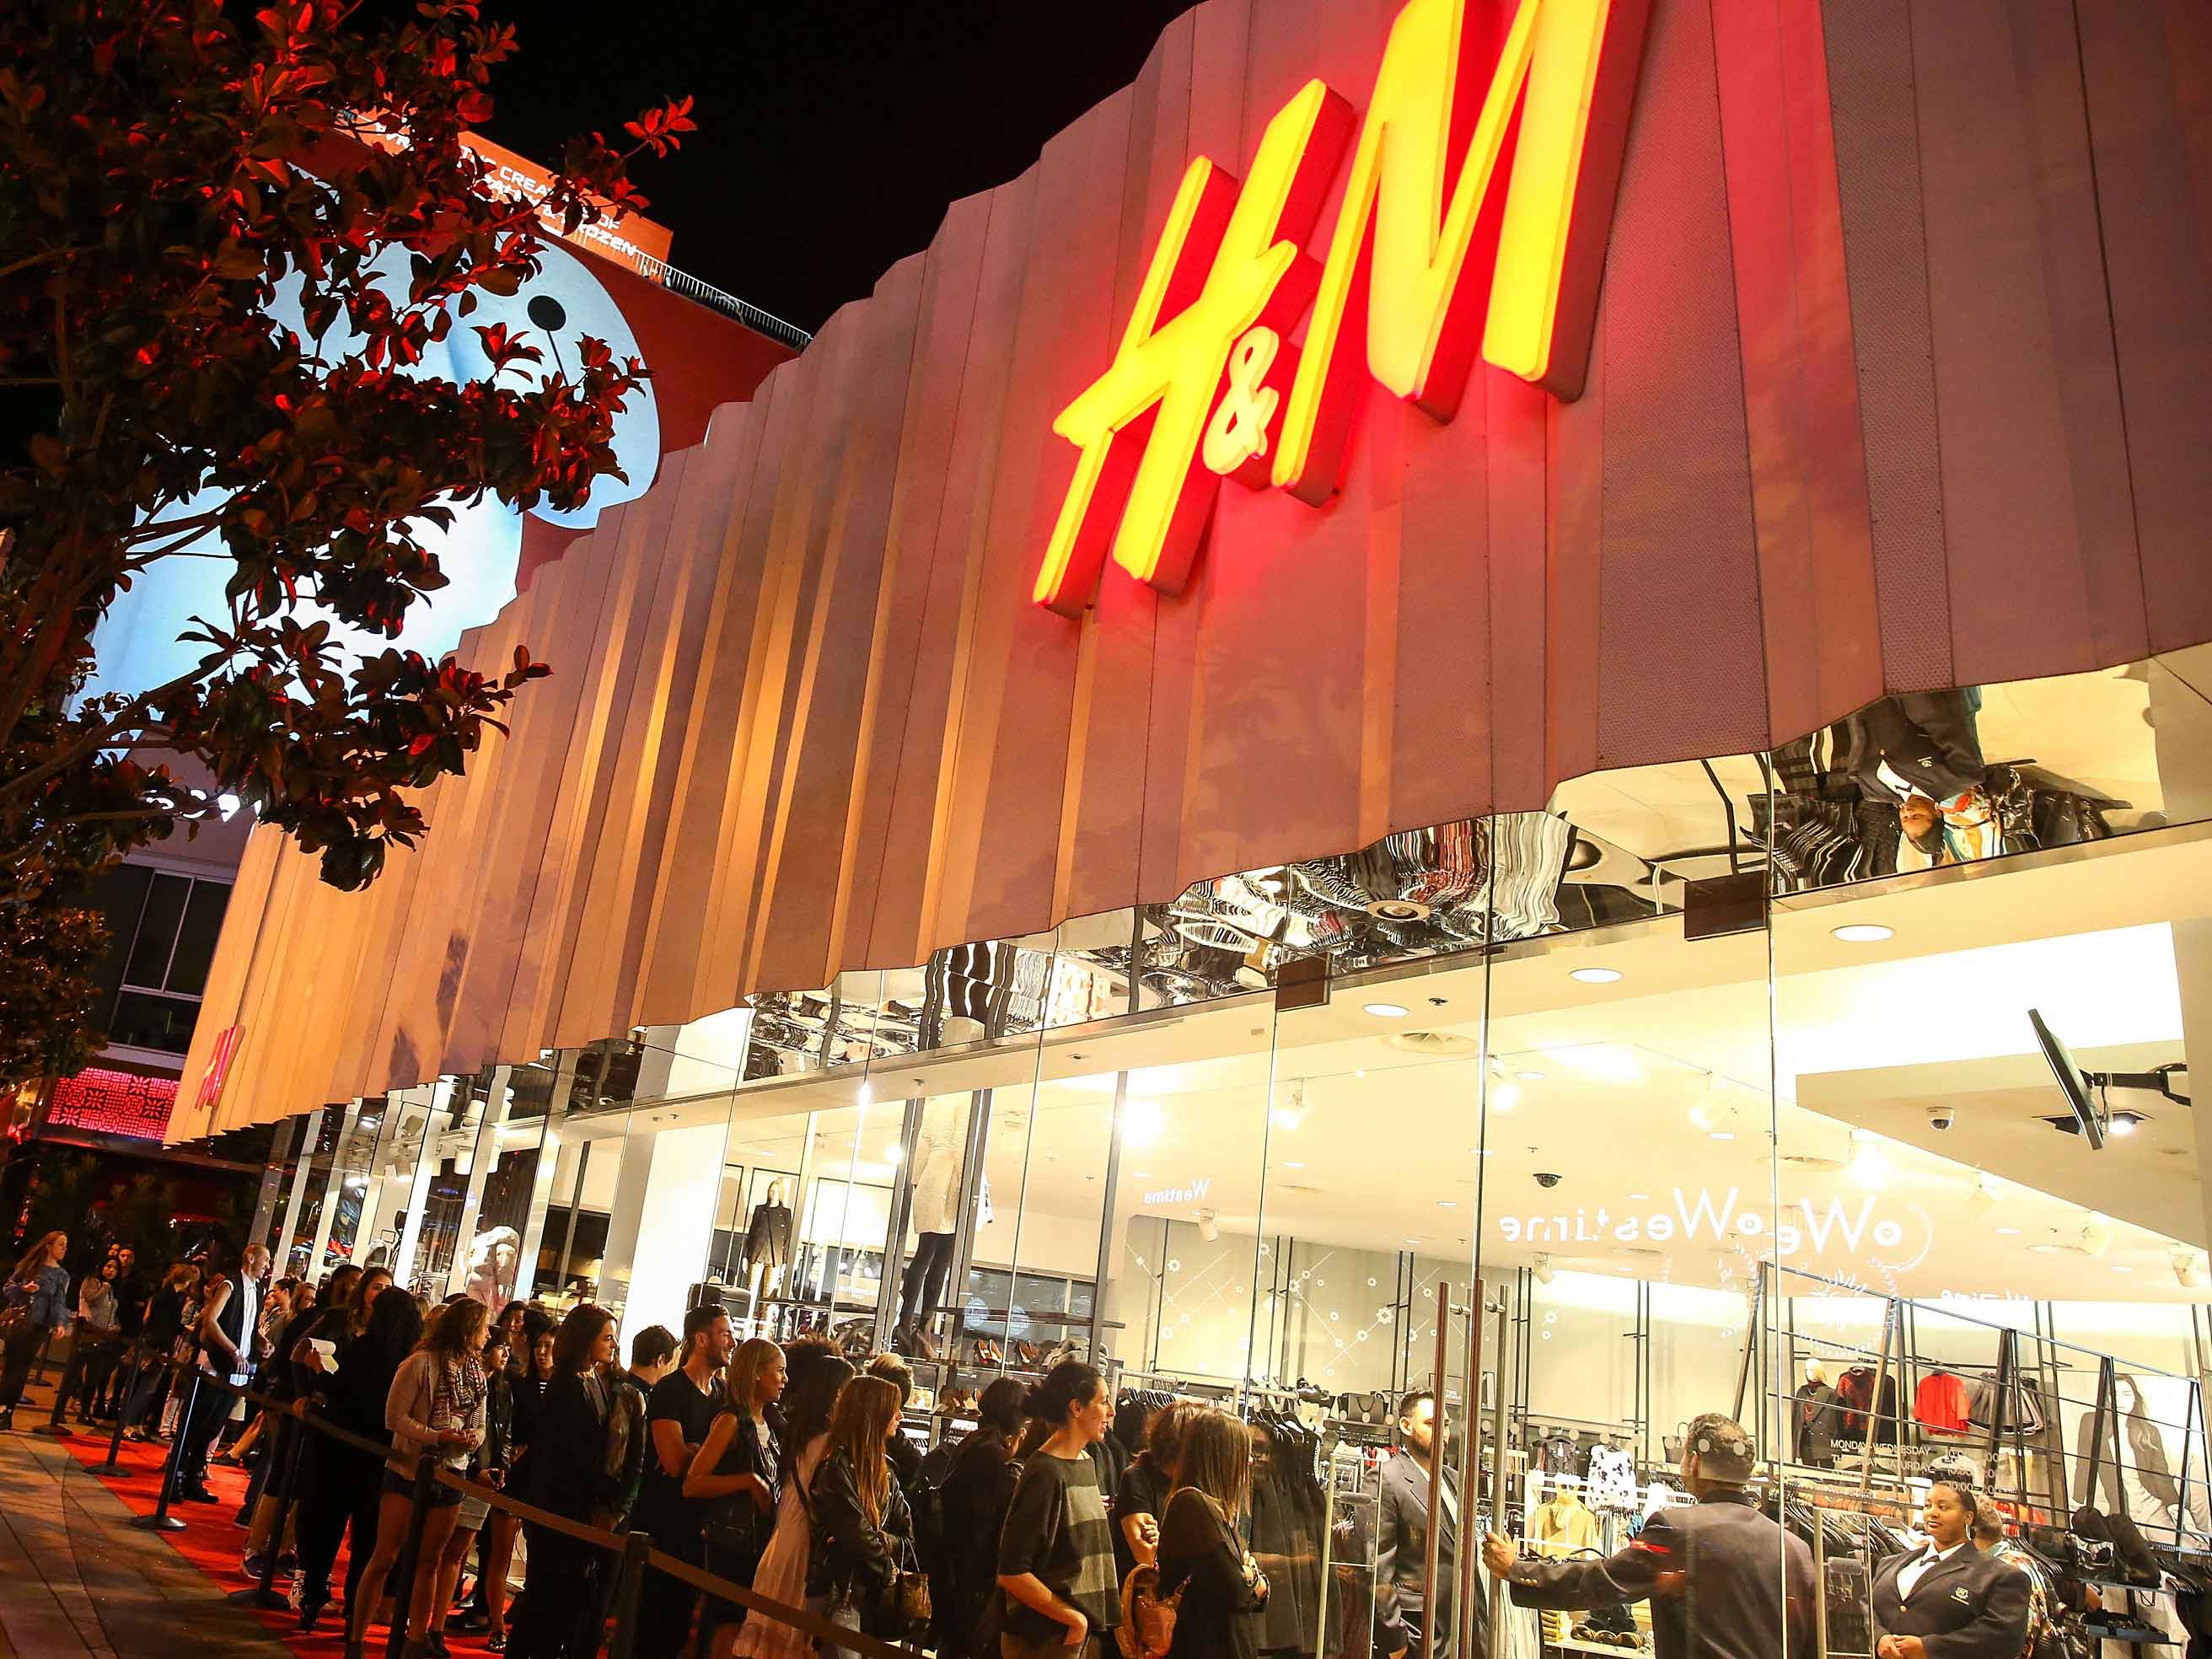 Shoppers waiting for the Alexander Wang x H&M launch